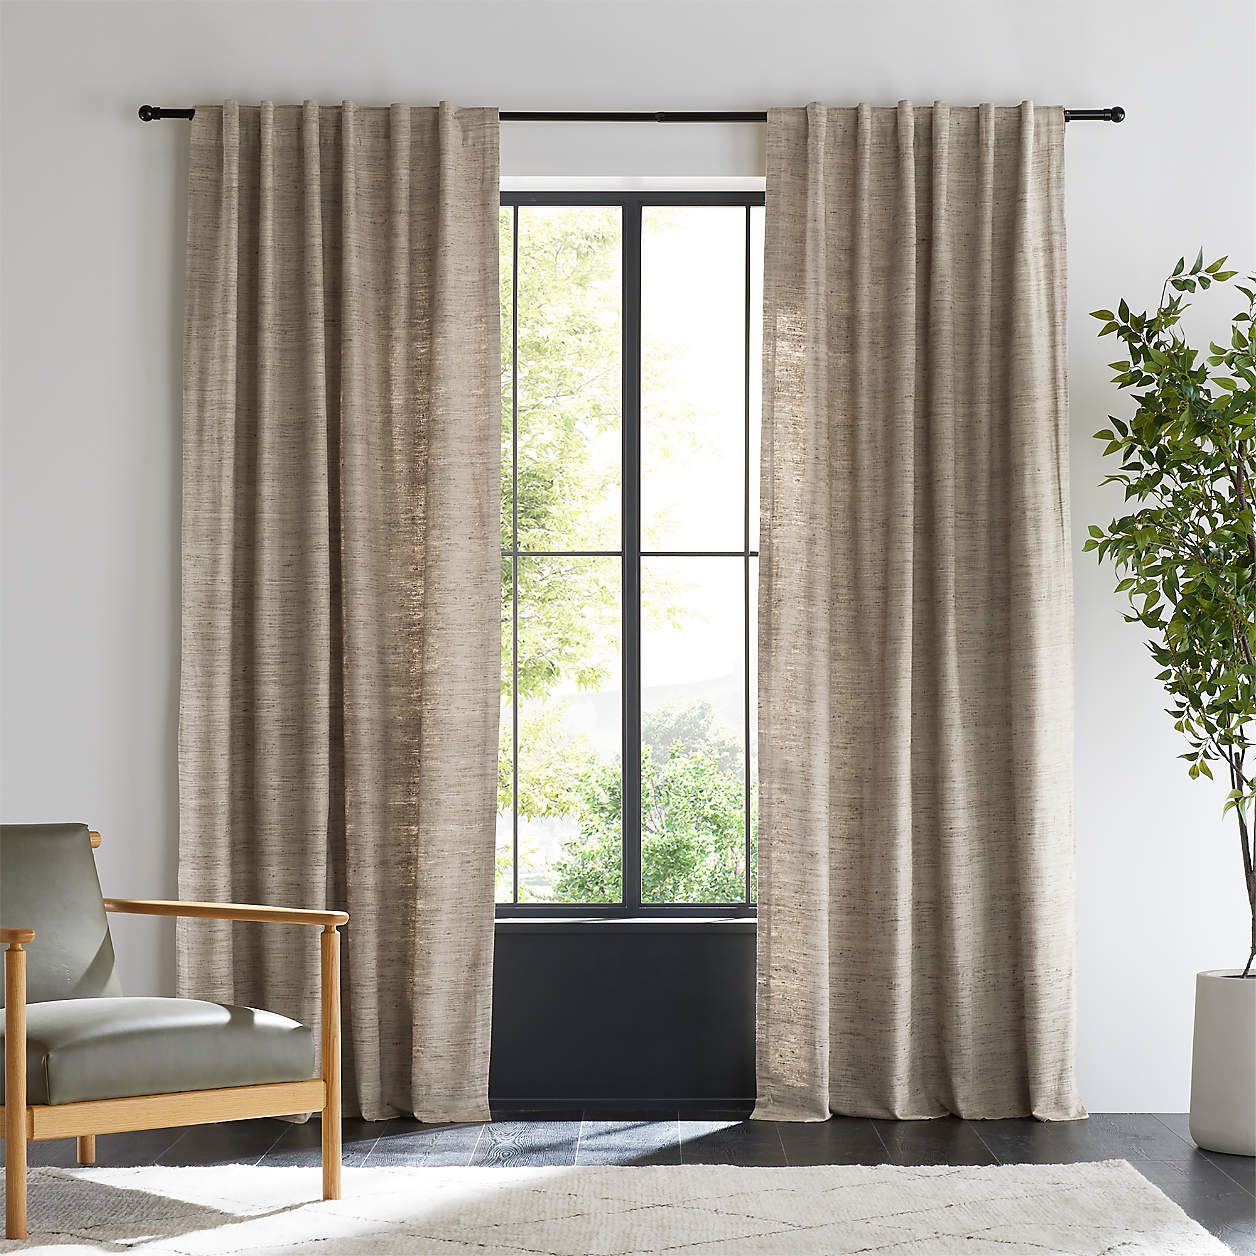 Luxurious Living: Enhance Your Space with Silk Curtains